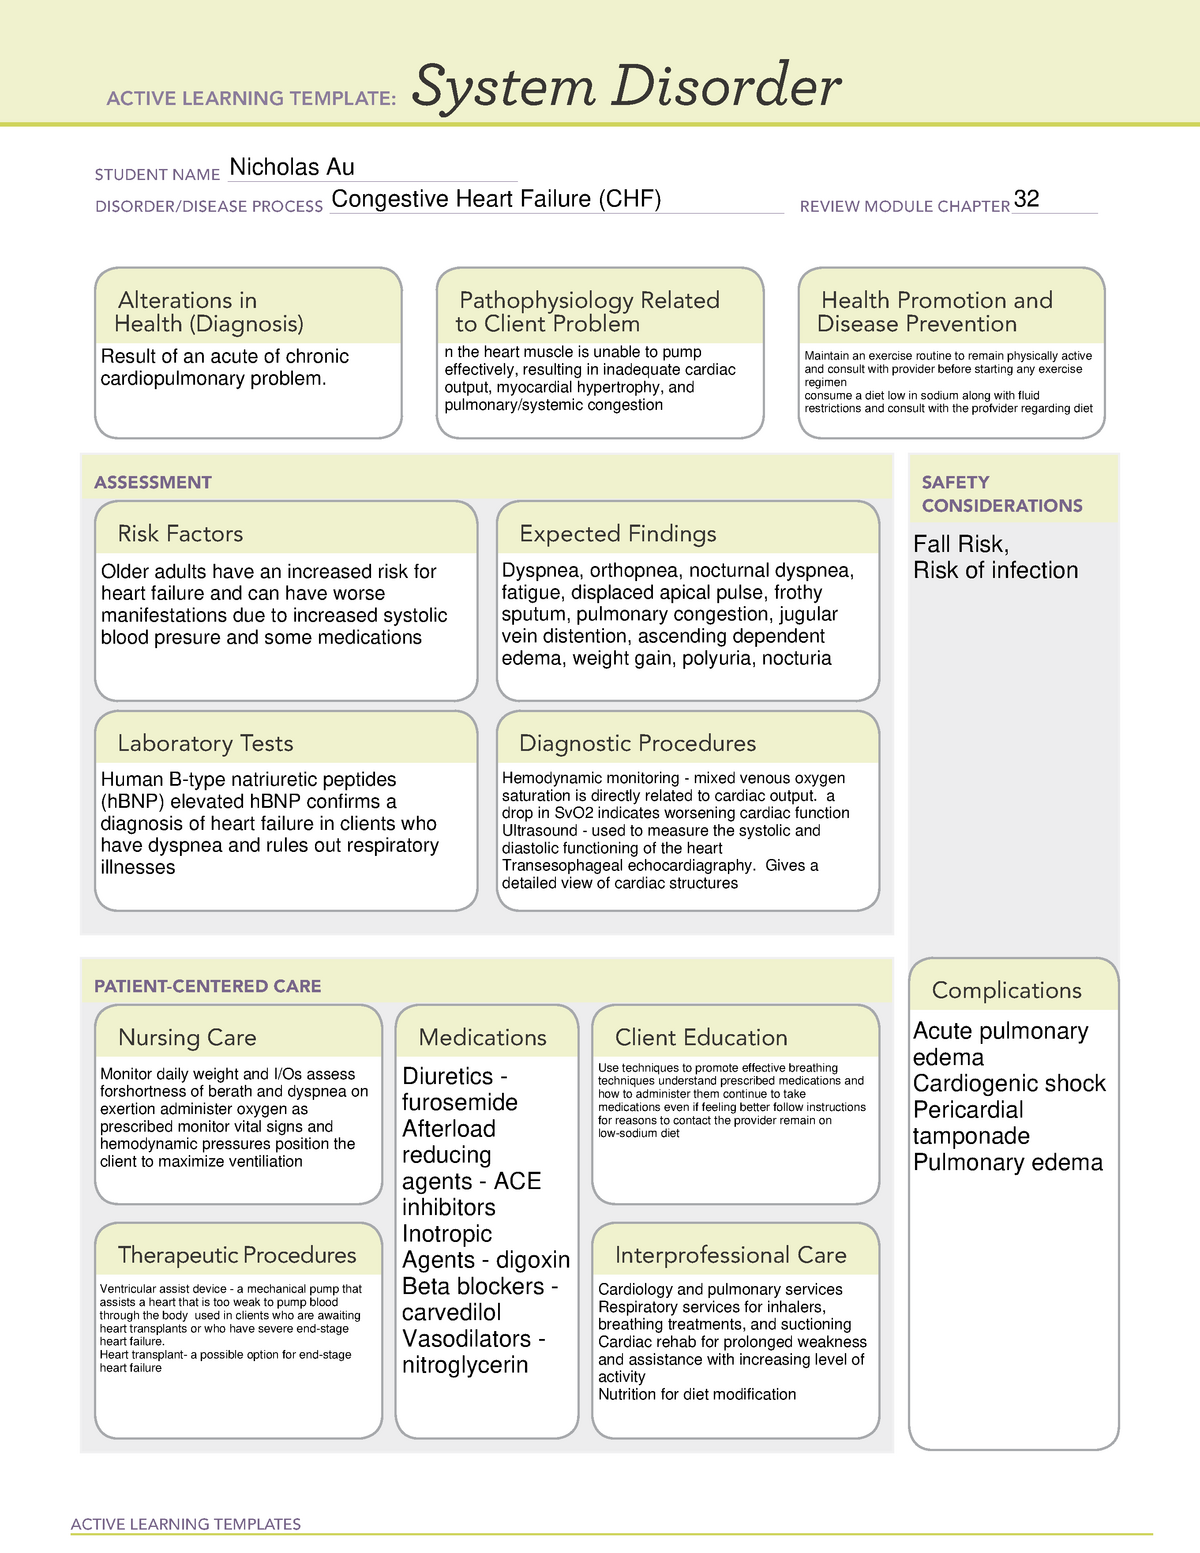 ATI System Disorder Template Heart Failure ACTIVE LEARNING TEMPLATES